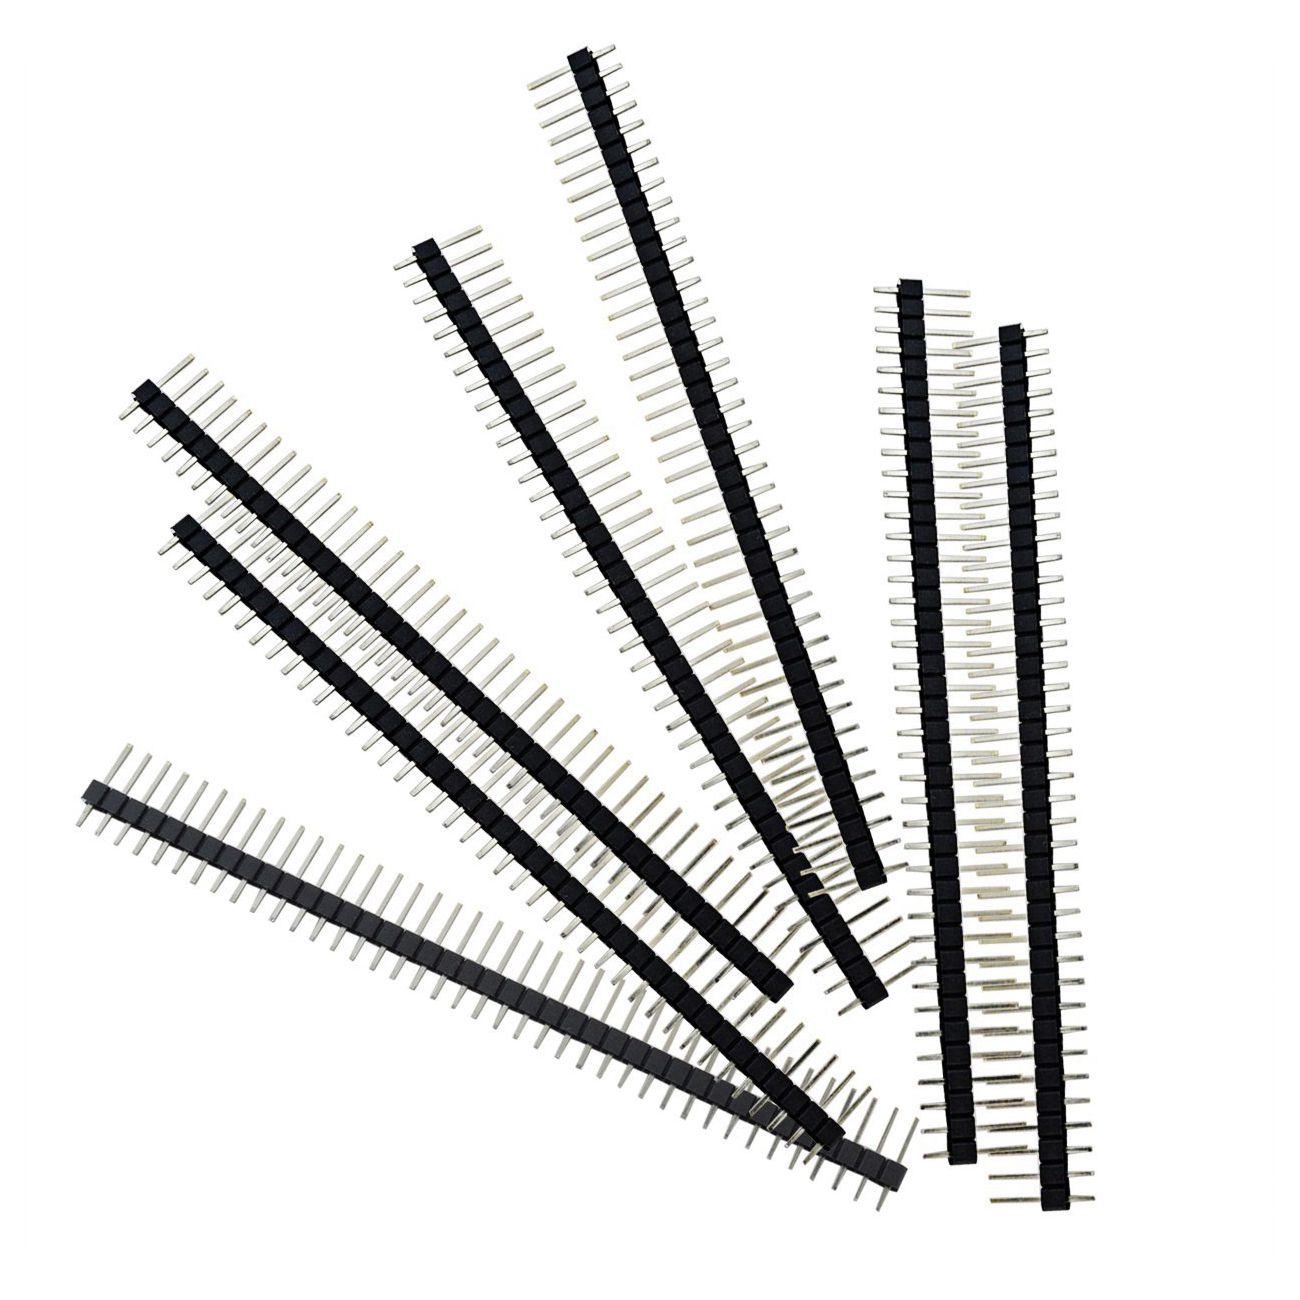 100pcs Male Header Pins, Straight Single Row 40 Pin 0.1 Inch (2.54mm) Male Pin Header Connector PCB Board Pin Connector Electron